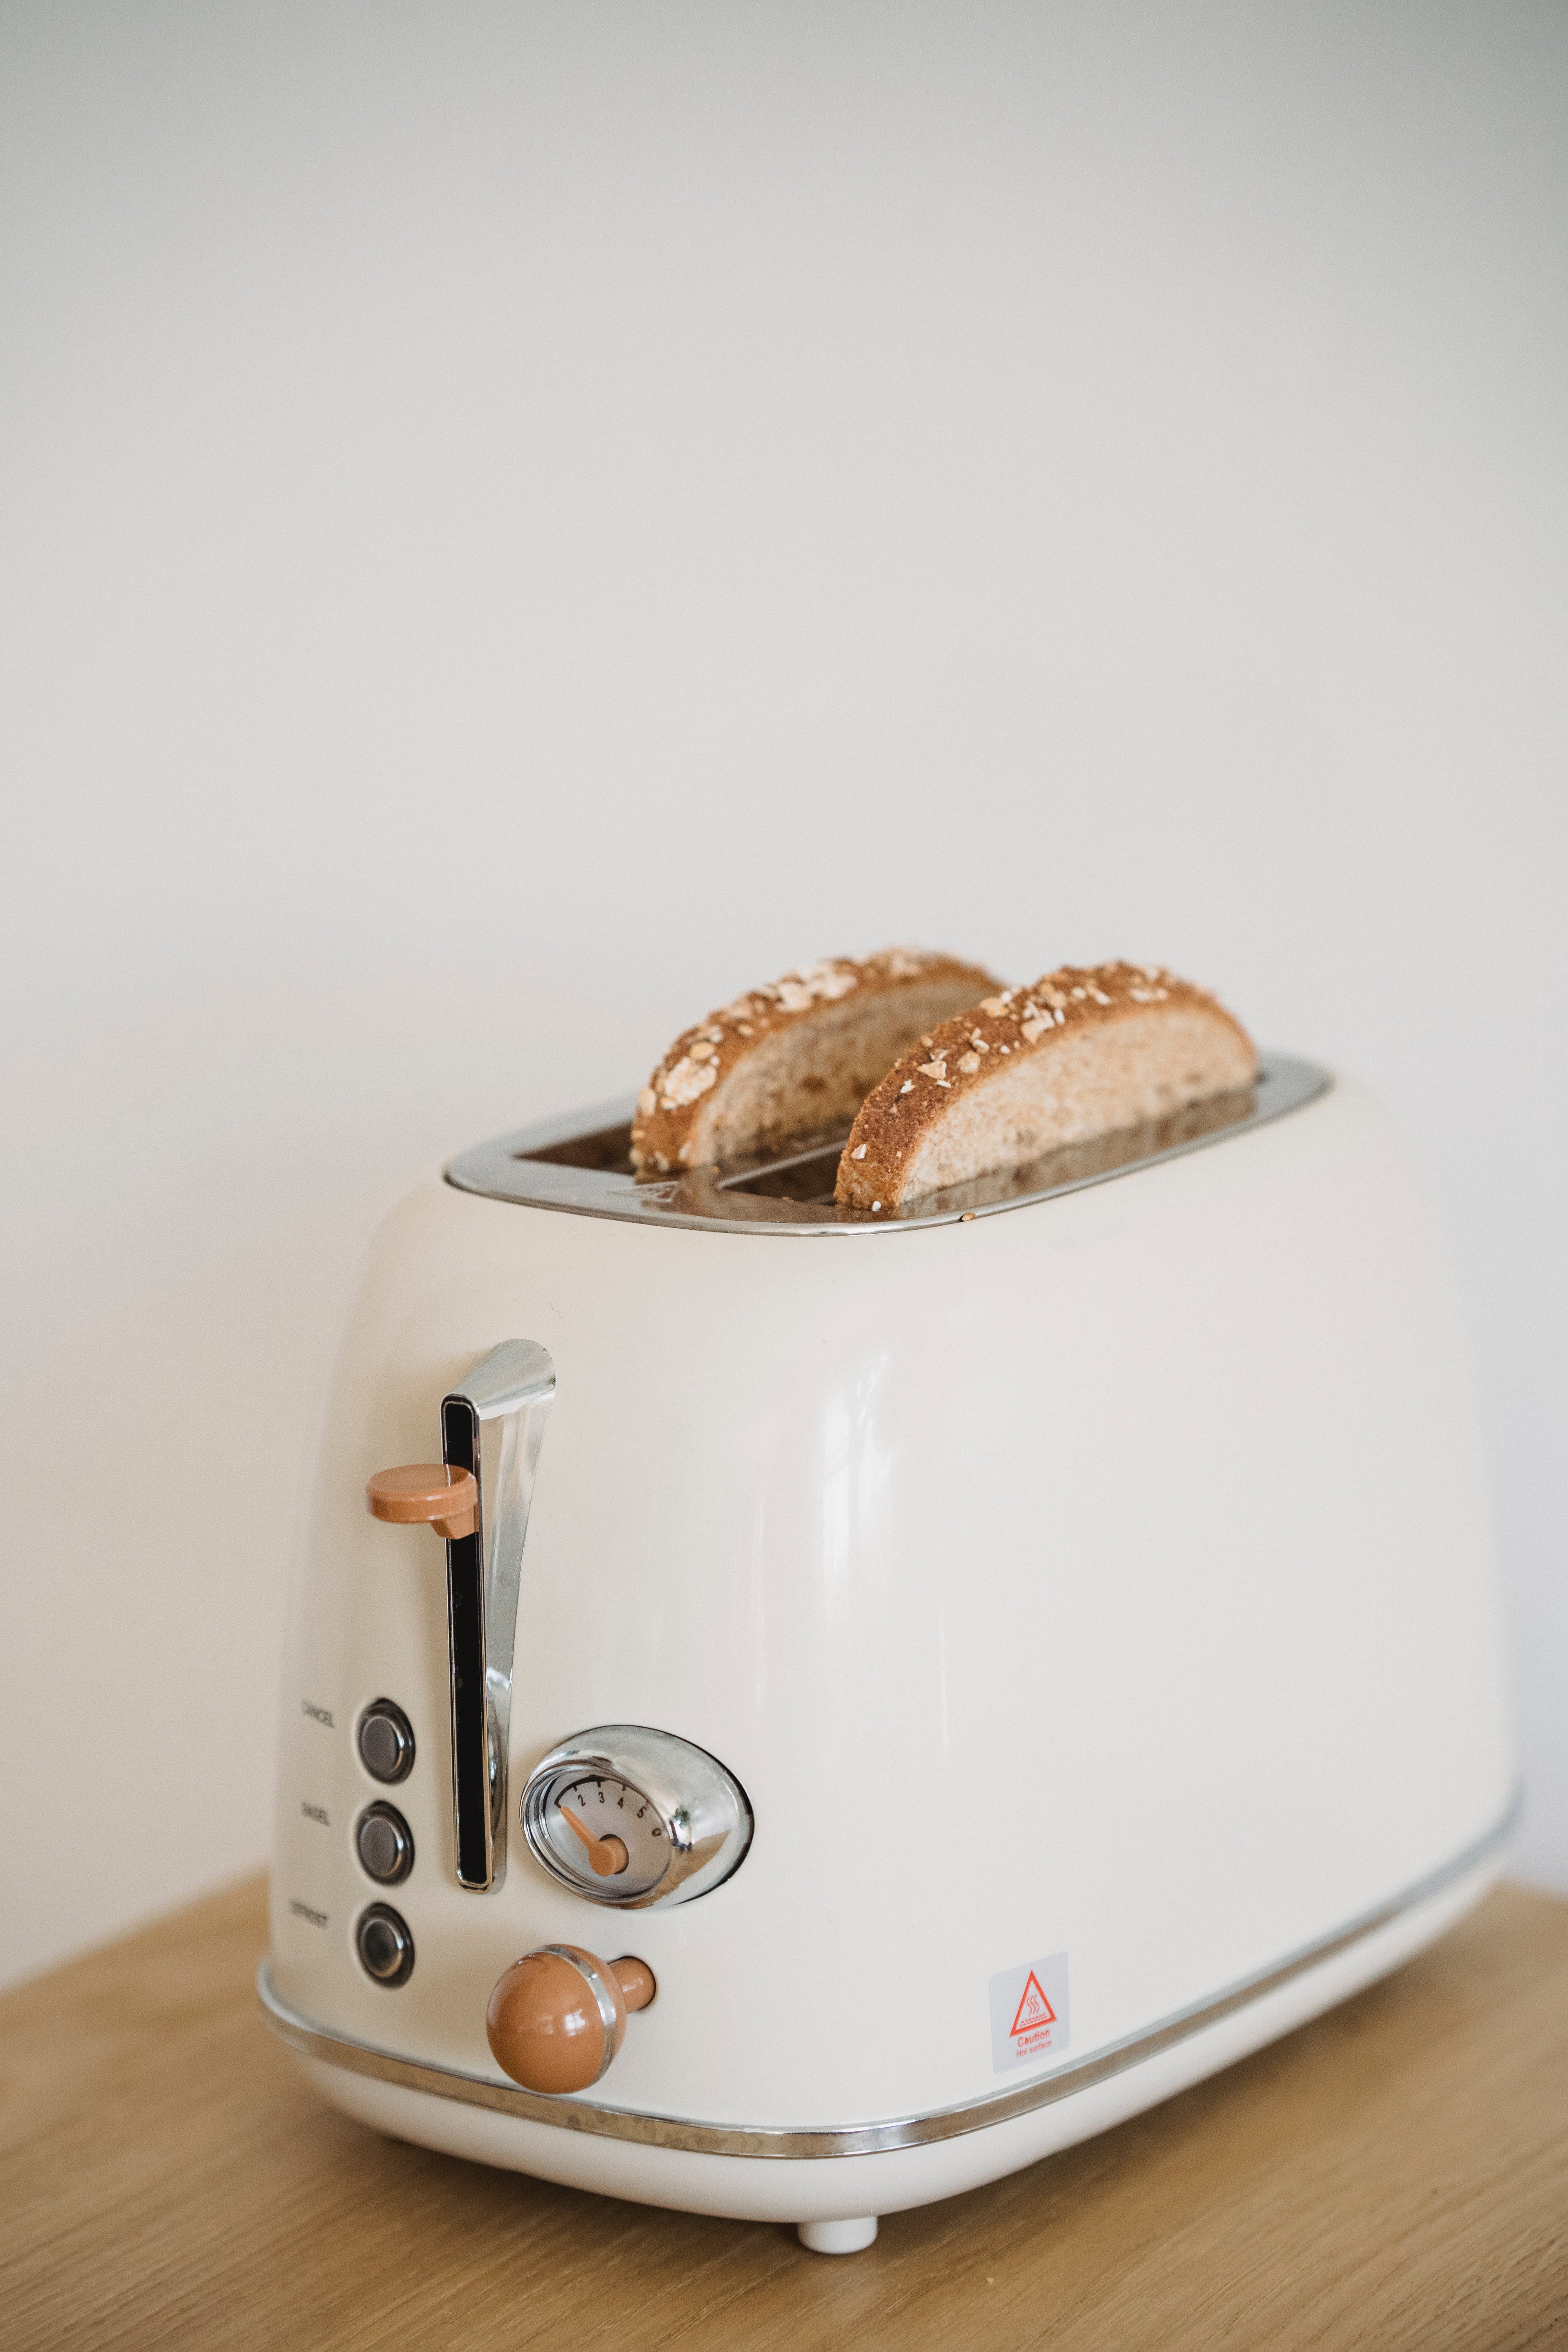 Toaster with bread. | Source: Pexels